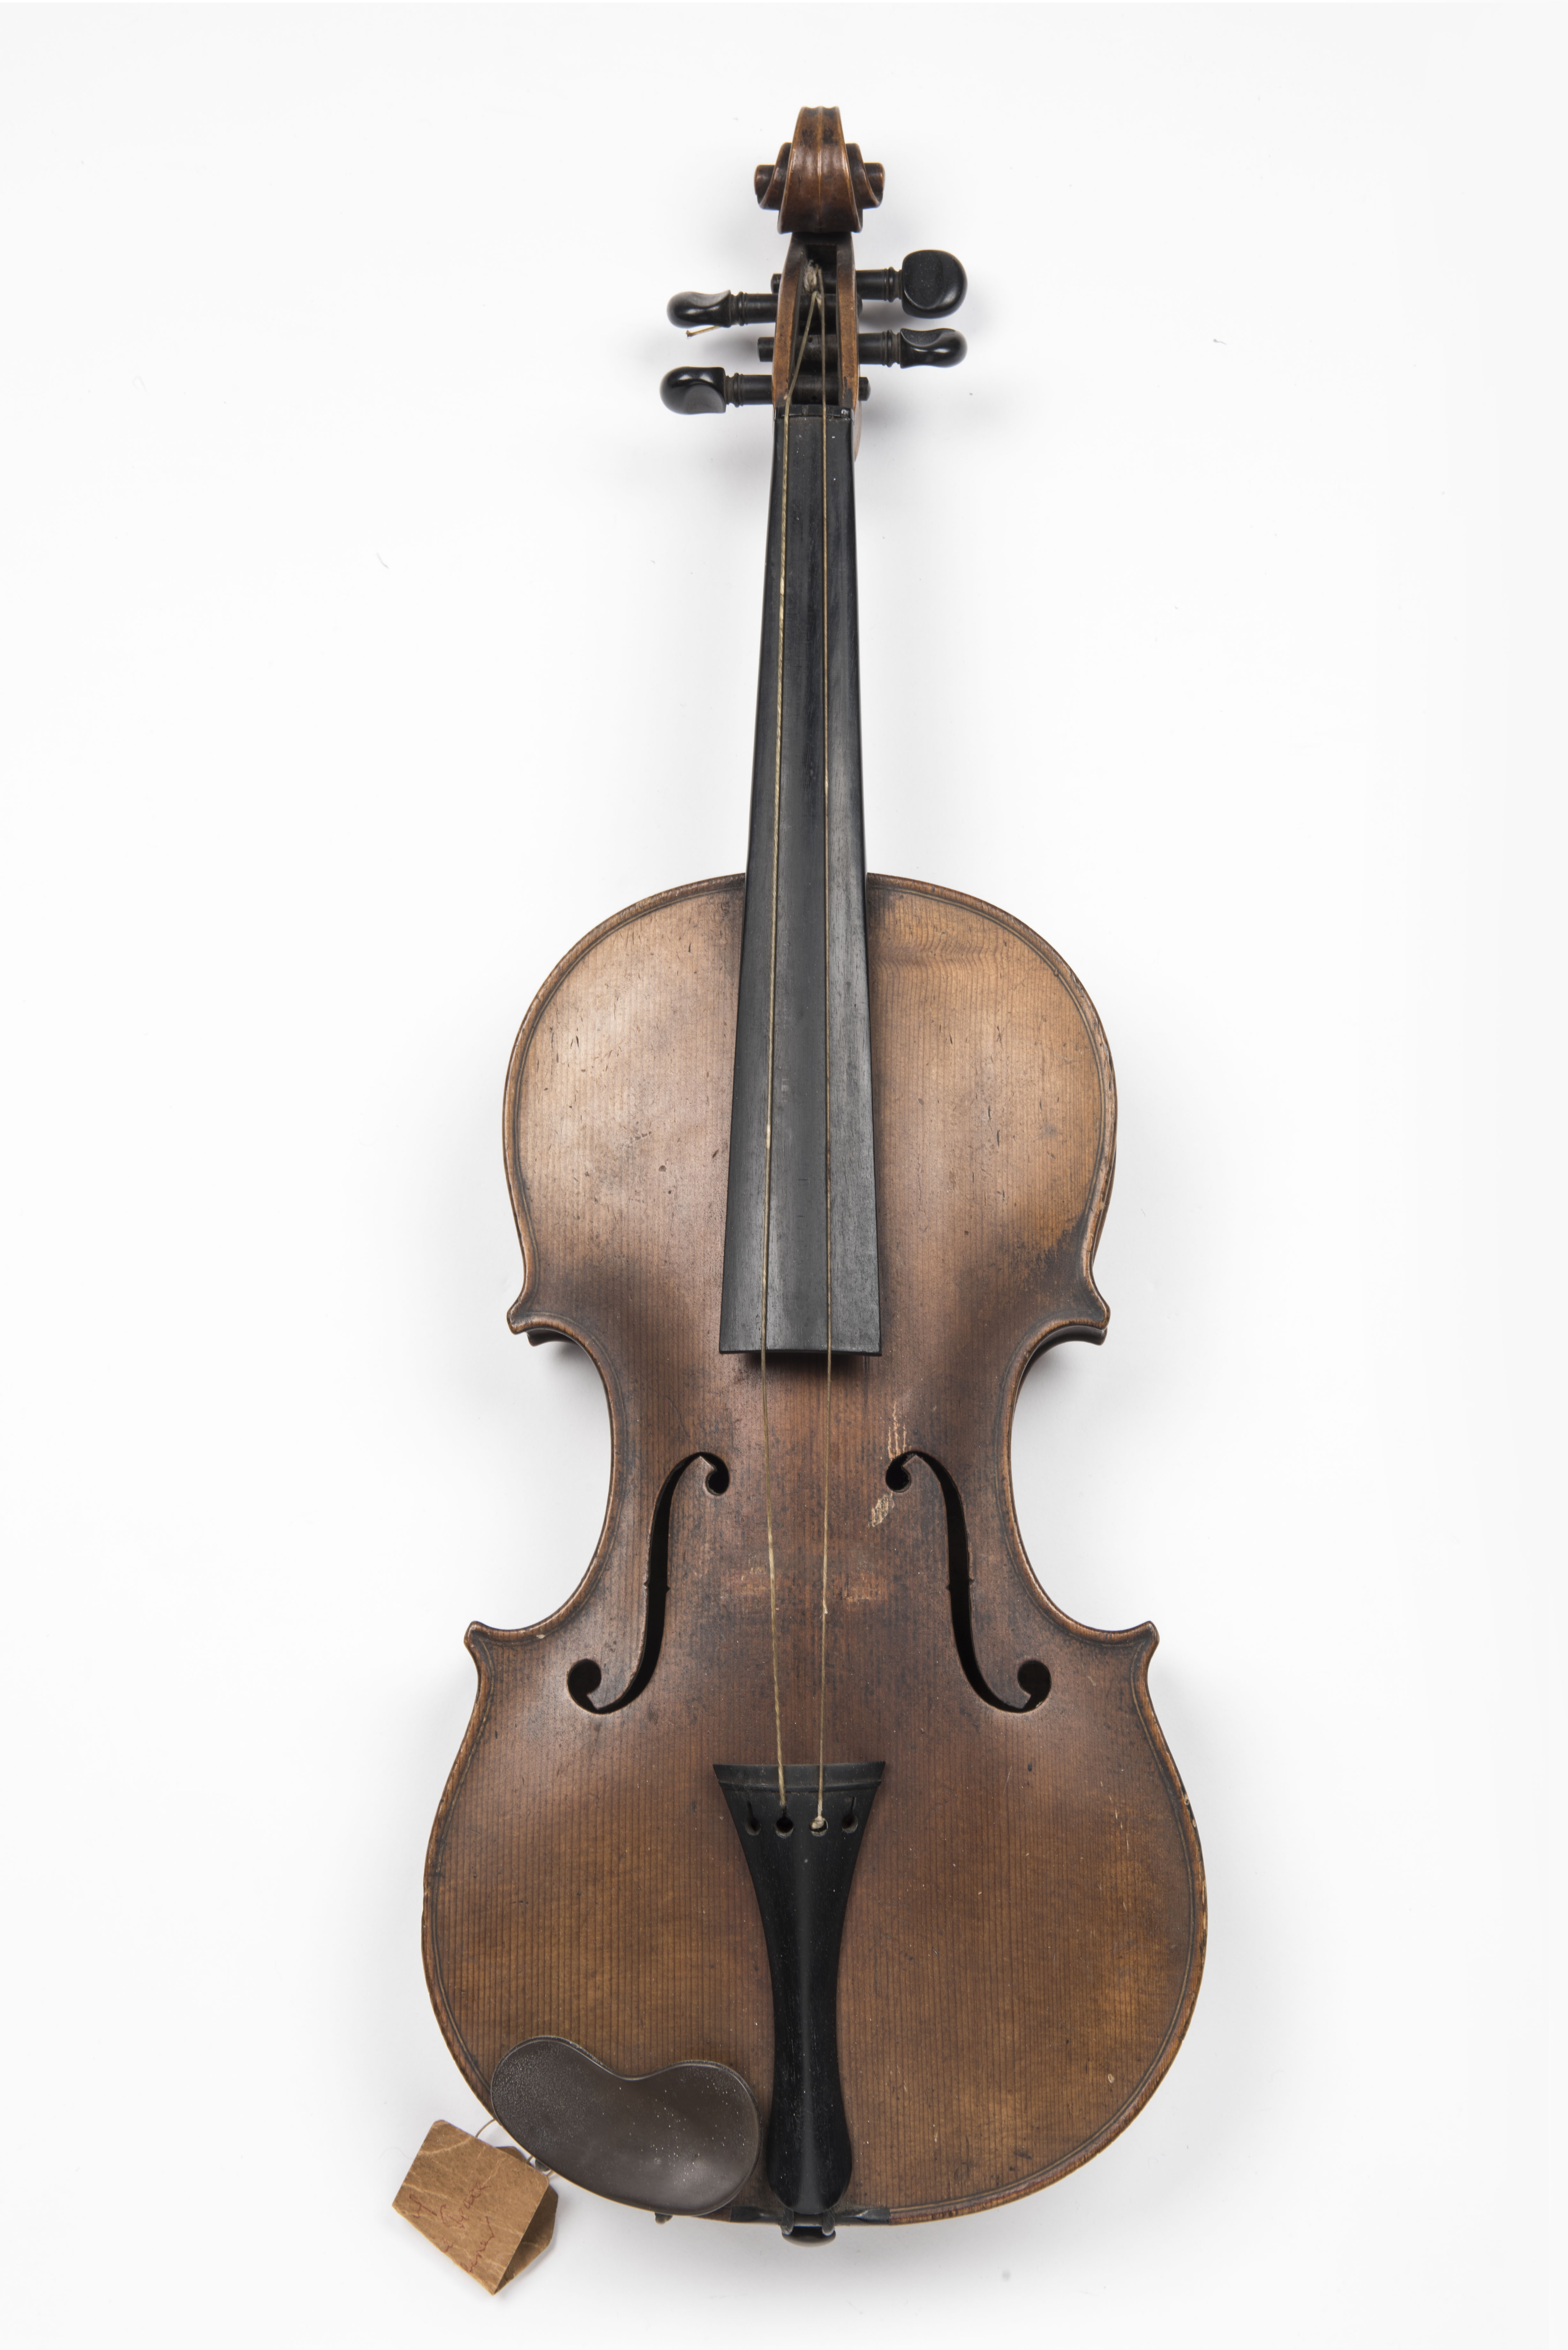 Violin belonging to cat burglar, Charles Peace, executed for killing a police officer in a burglary gone wrong in 1878. Peace was a musician serenading households by day; returning robber by night. © Museum of London / object courtesy the Metropolitan Police’s Crime Museum